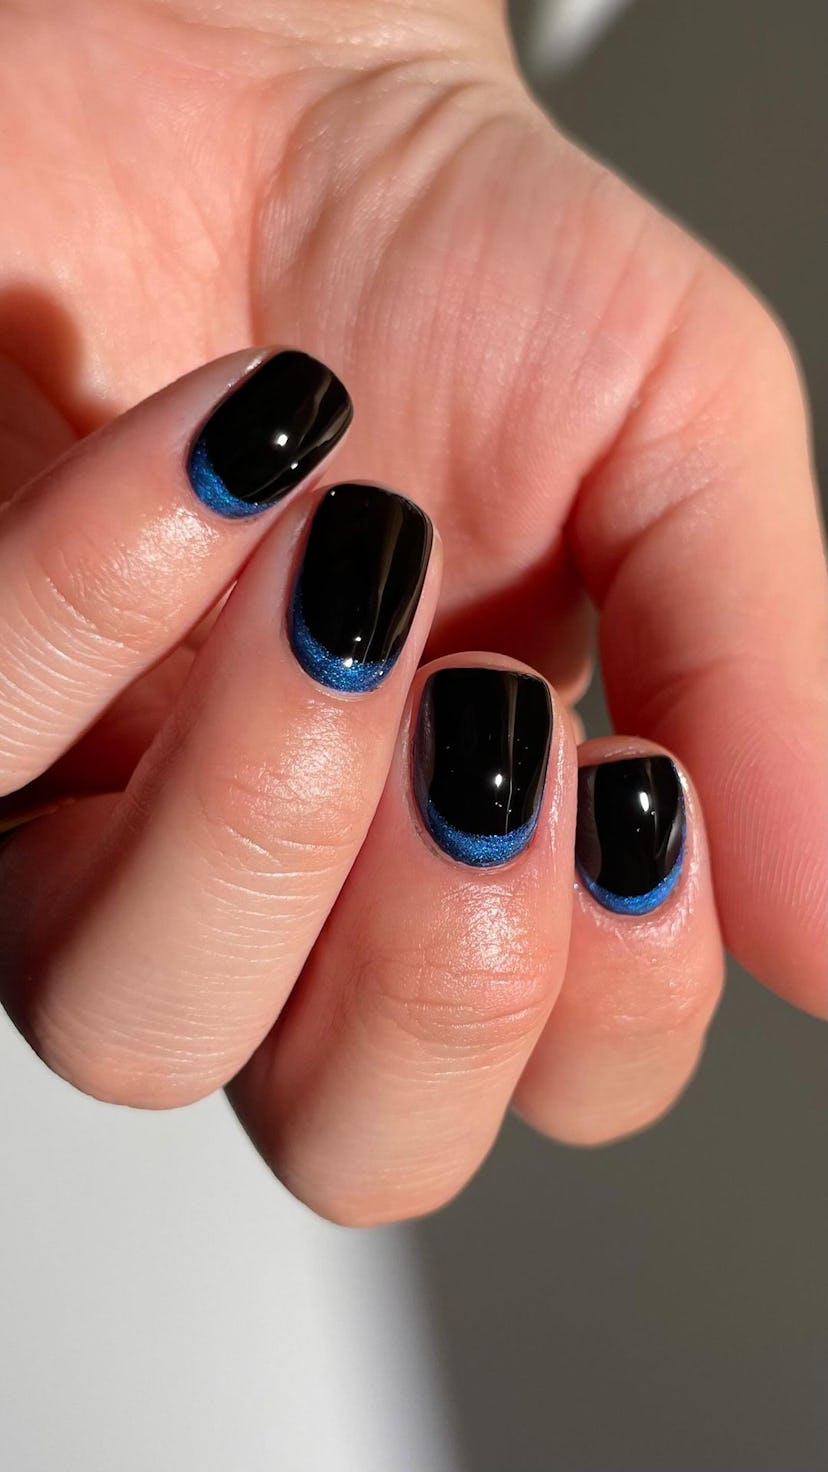 Metallic blue nail cuffs are on-trend.